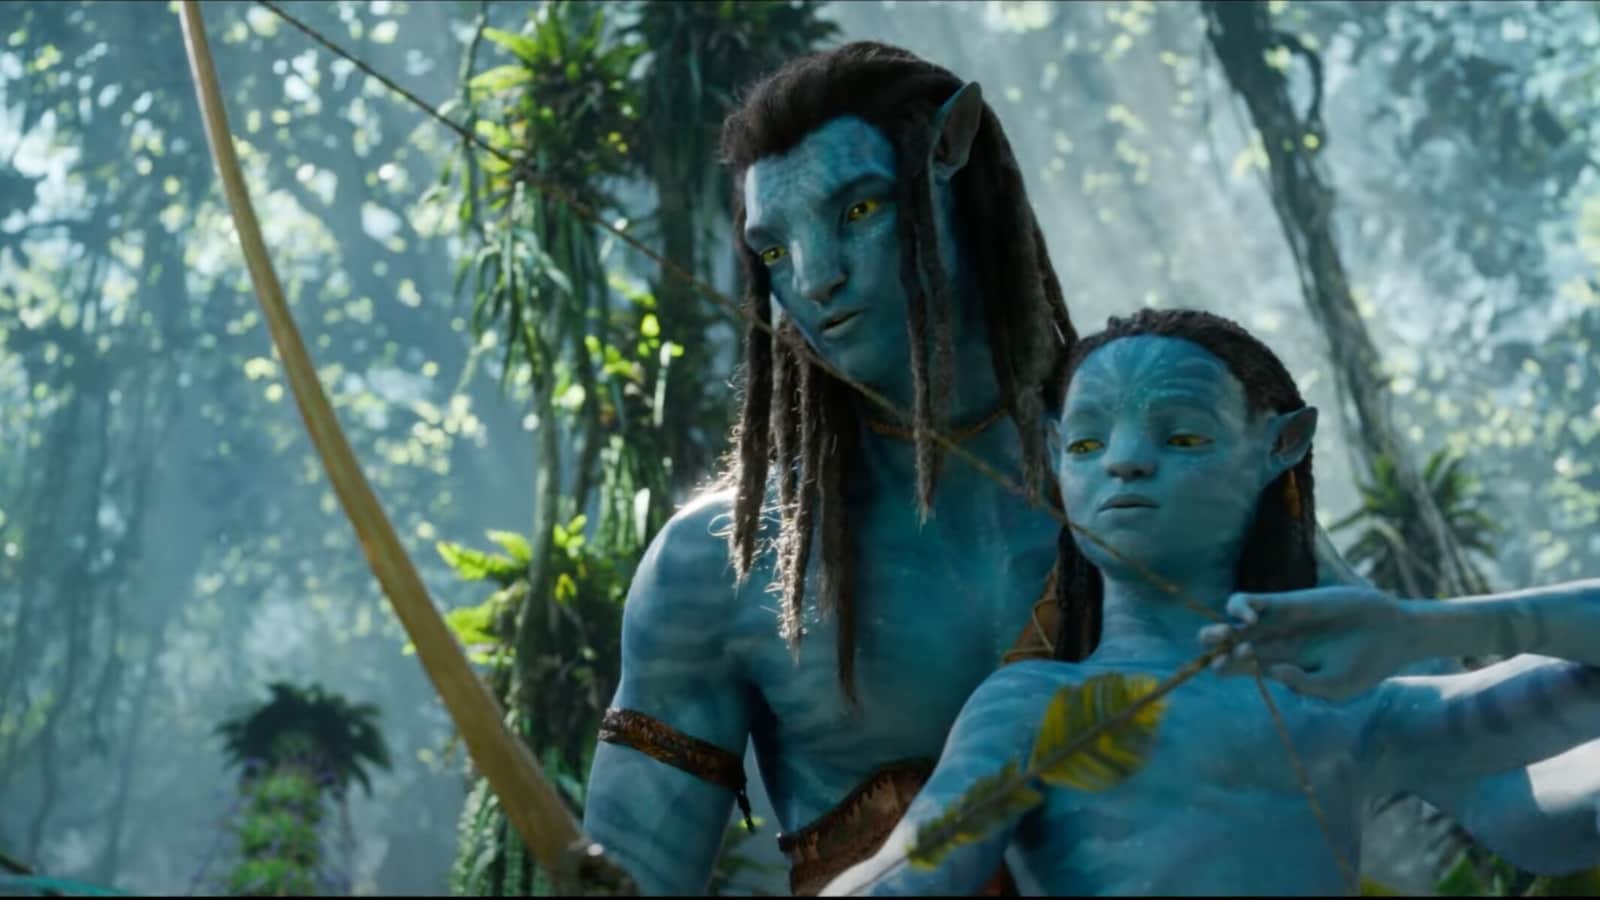 Avatar: The Way of Water trailer: James Cameron shows what true CGI marvel is | Hollywood